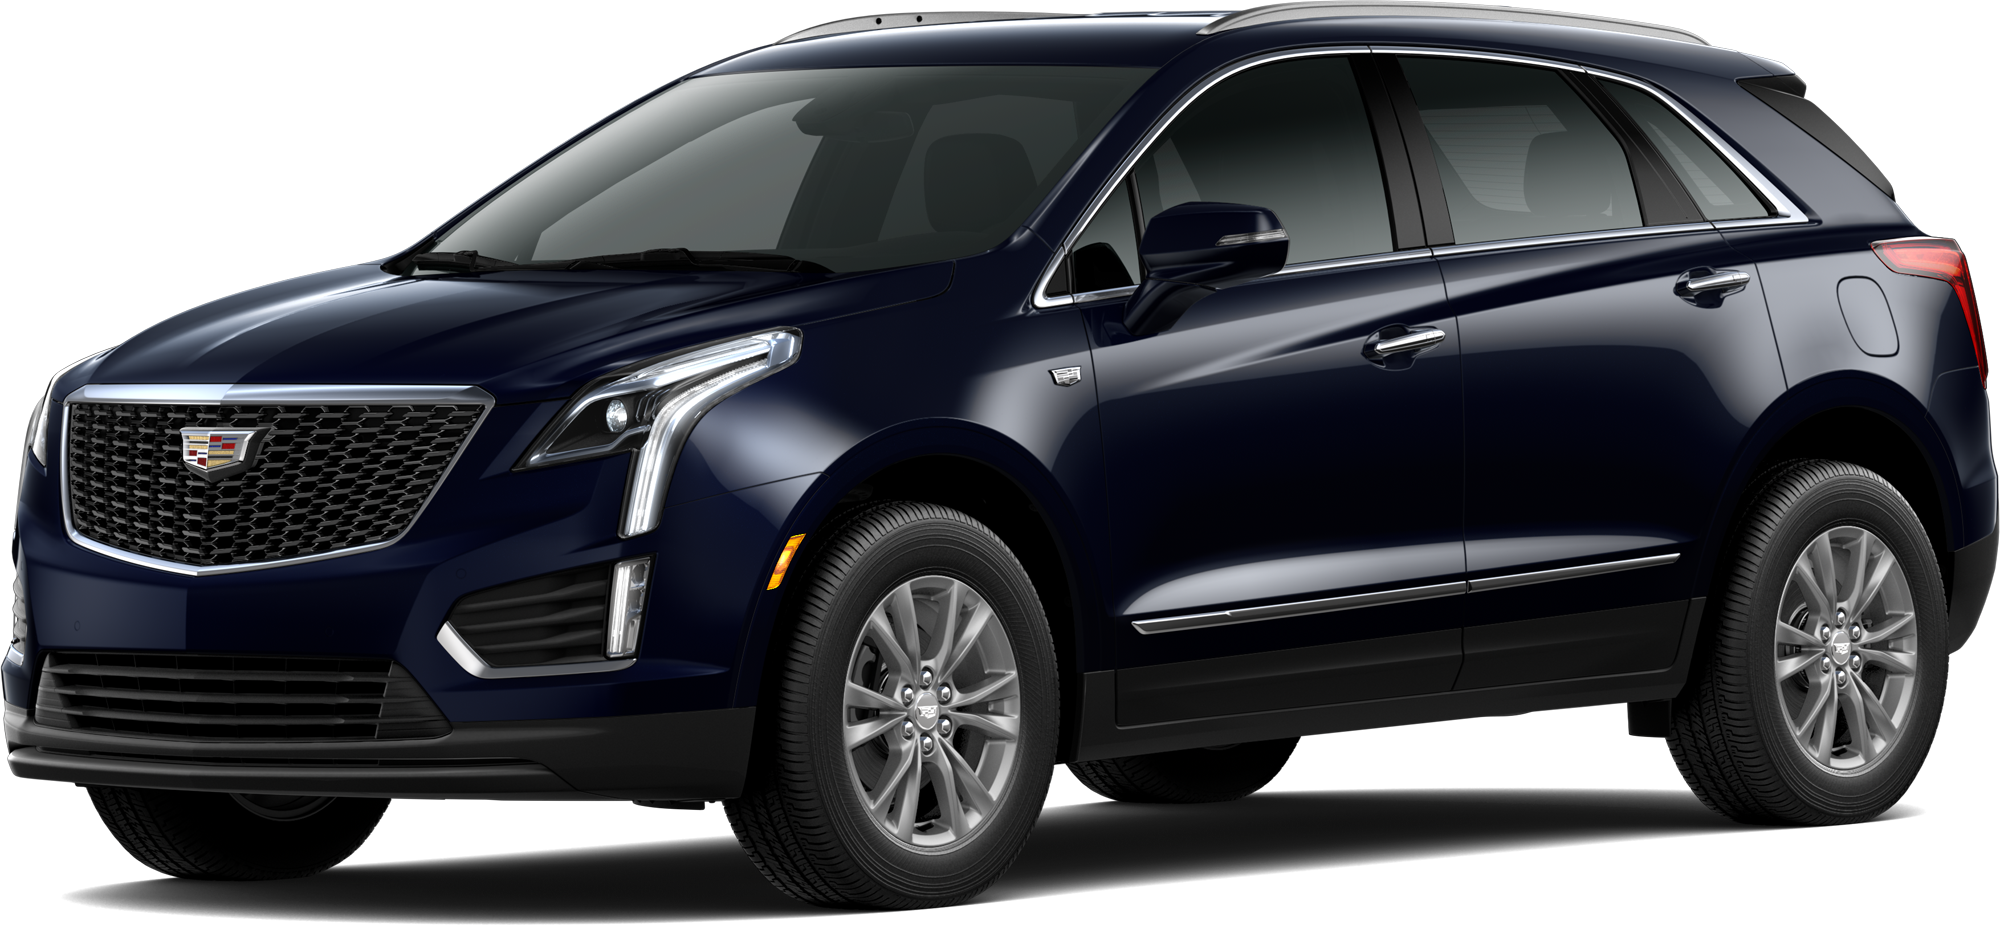 2021 CADILLAC XT5 Incentives, Specials & Offers in Wilkes-Barre PA